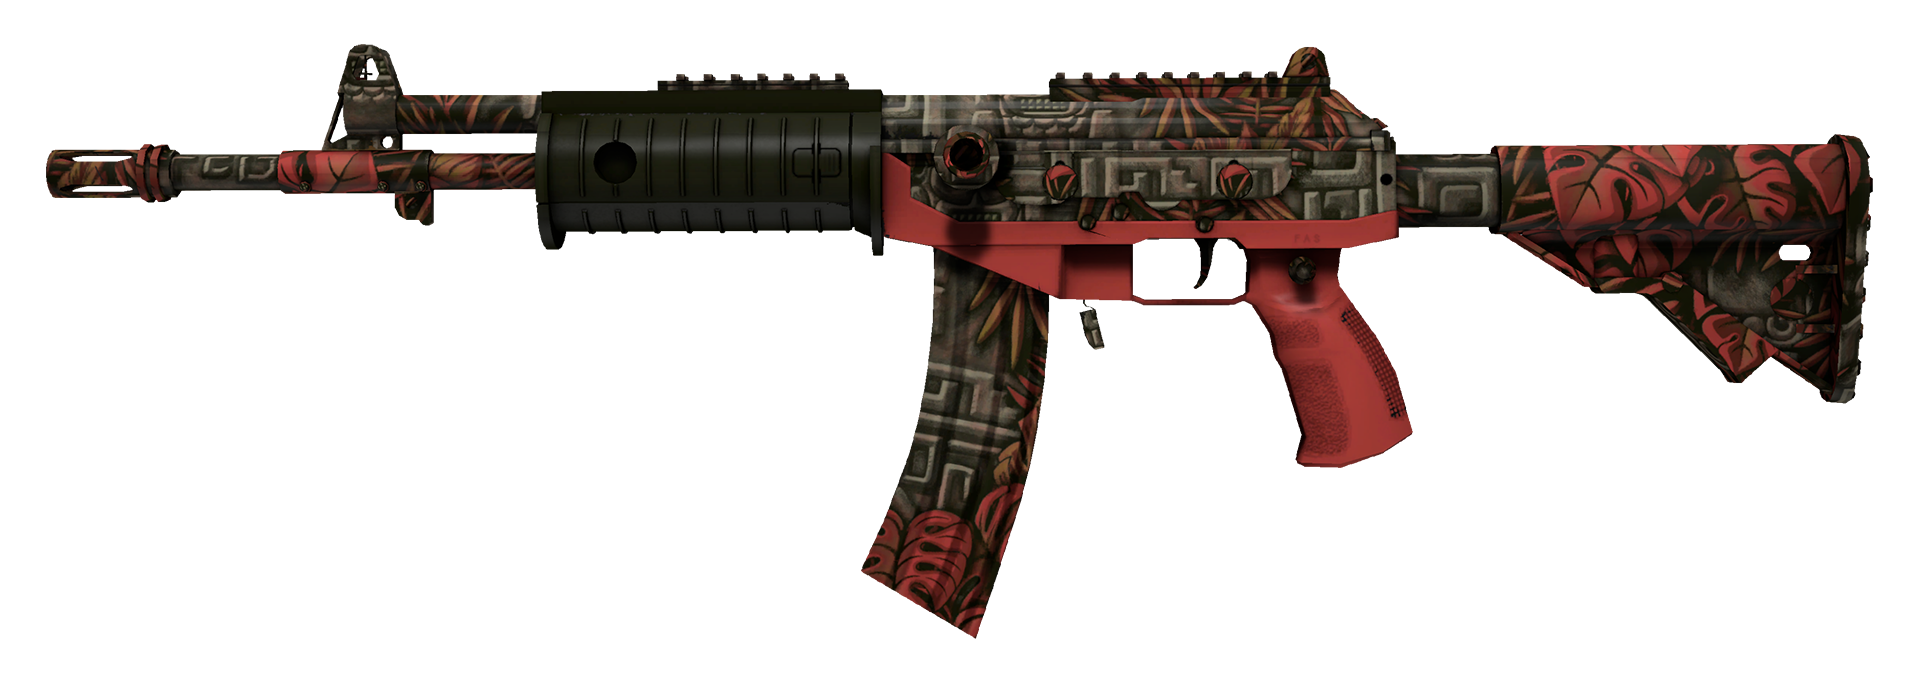 download the new version for windows Galil AR Signal cs go skin